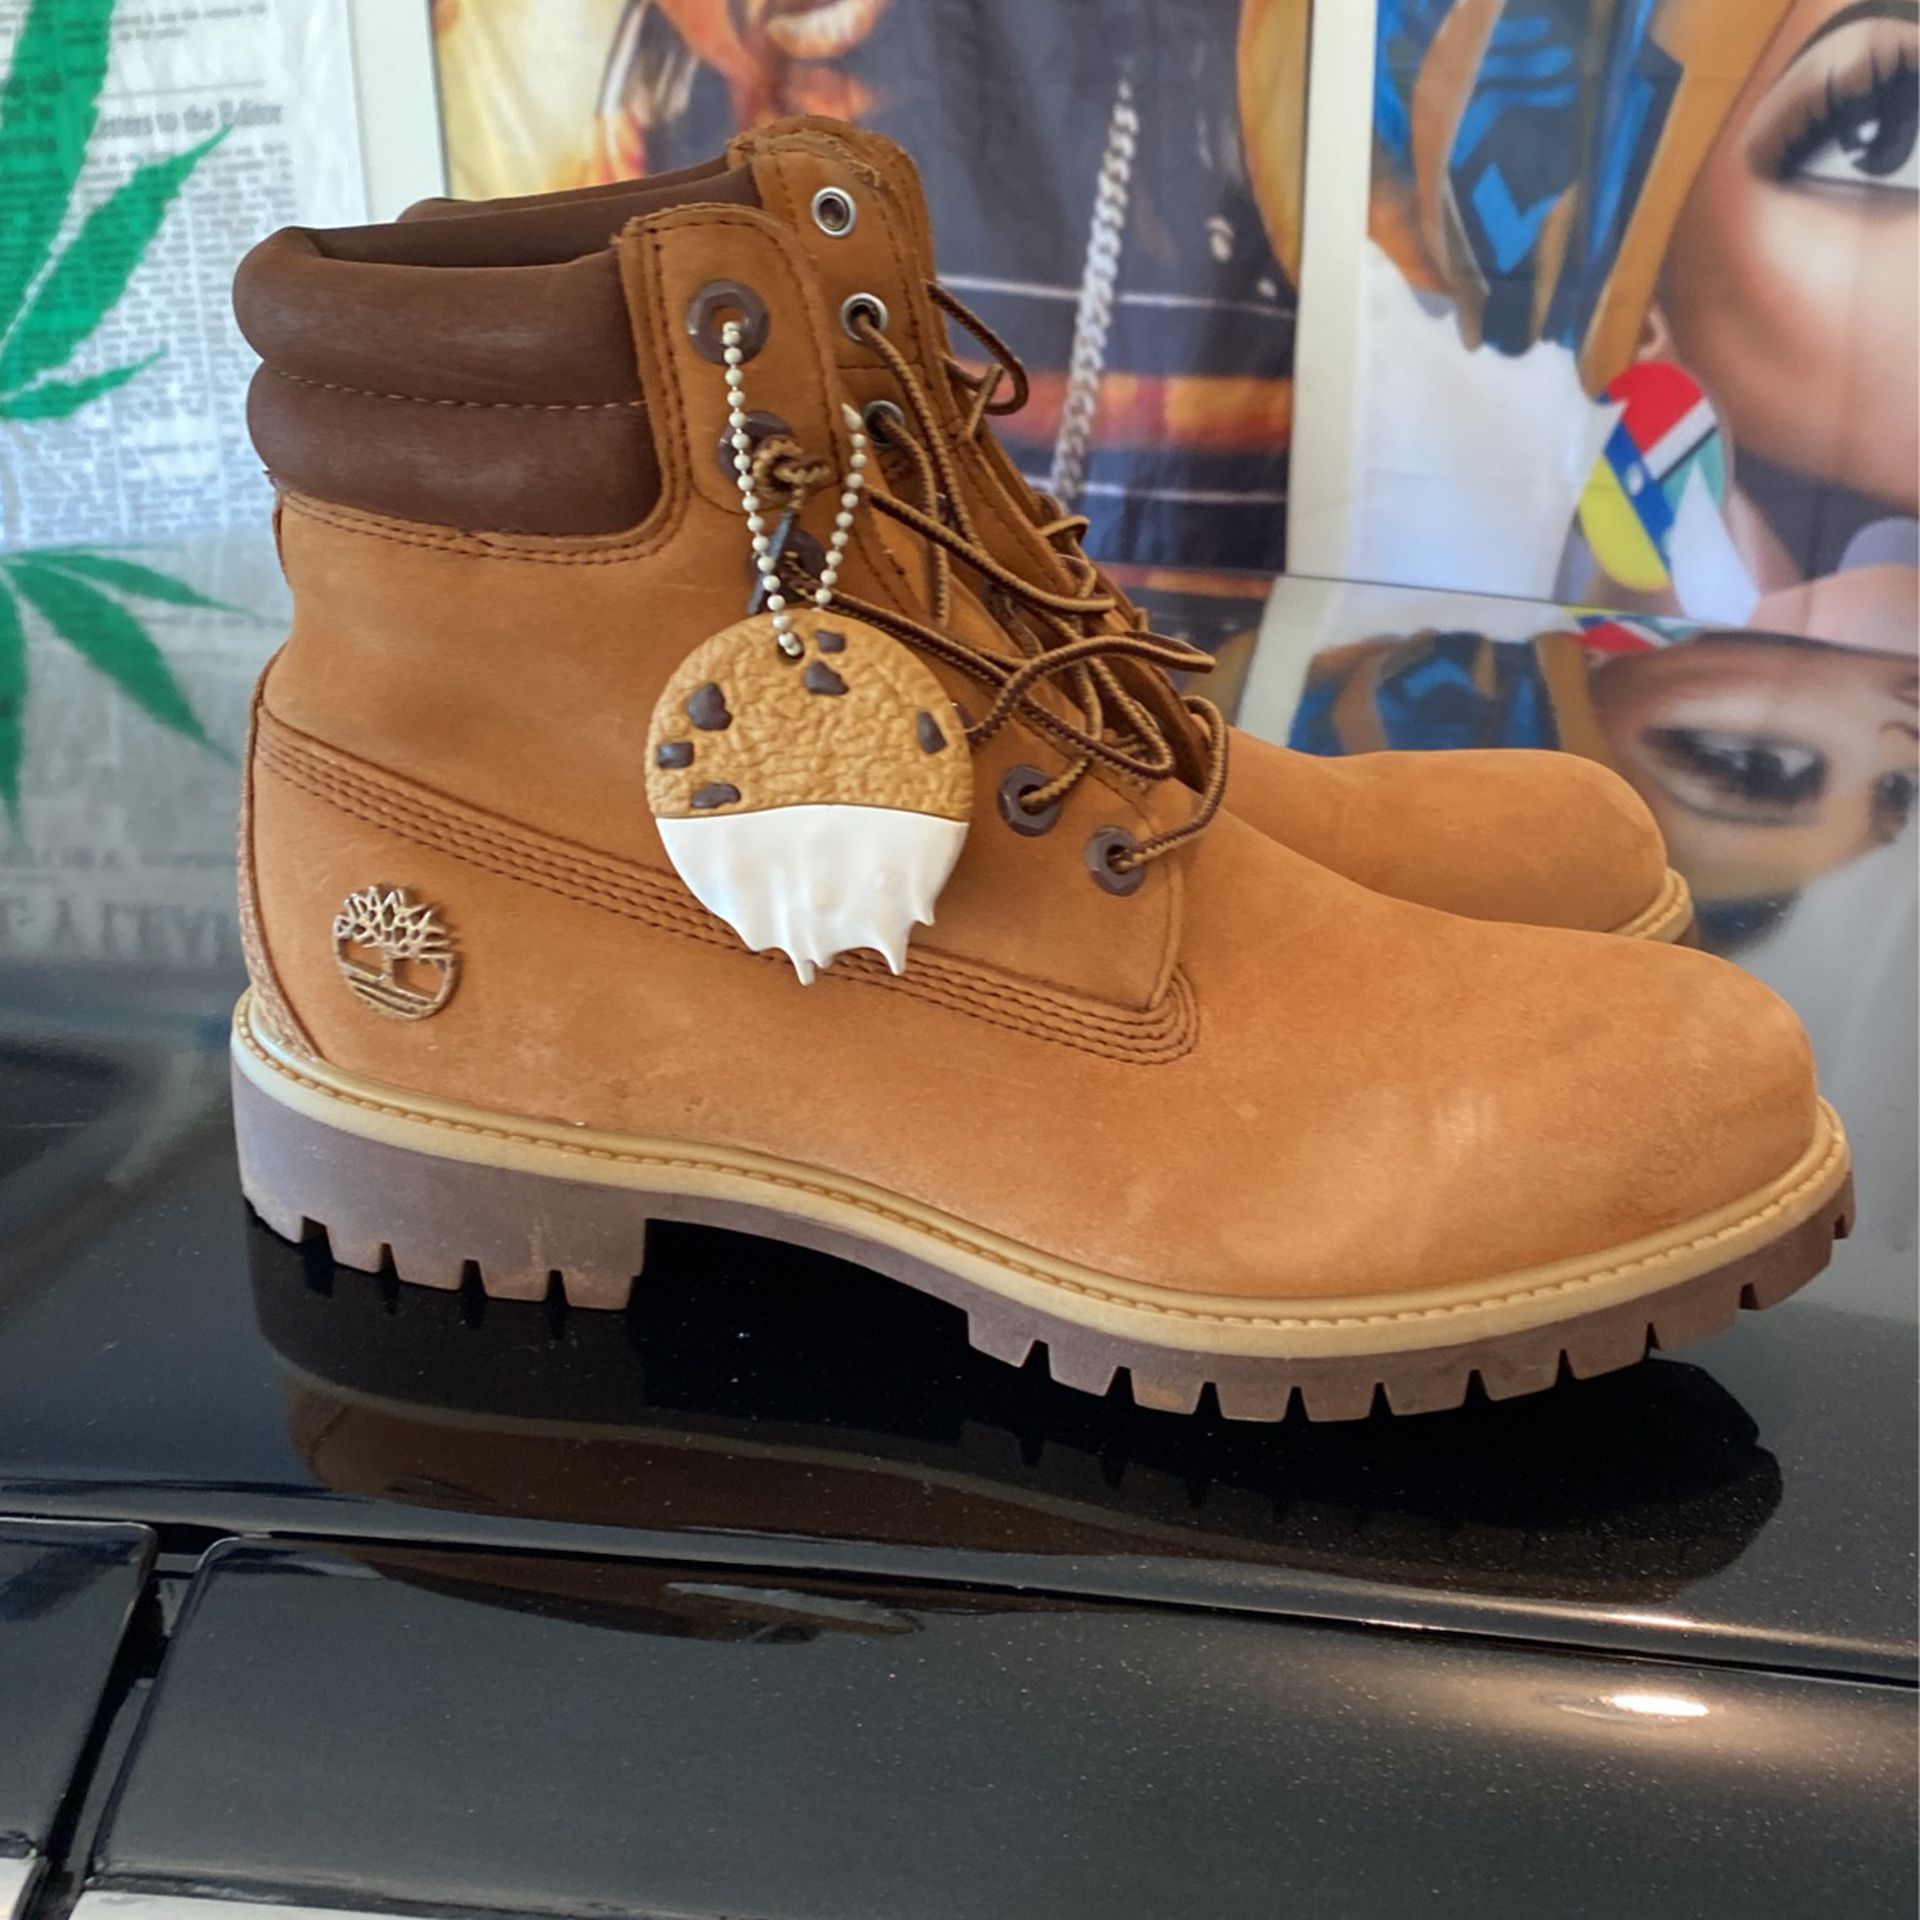 LIMITED EDITION CHRISTMAS COOKIE 🍪 TIMBERLAND BOOTS MENS SUZE 9